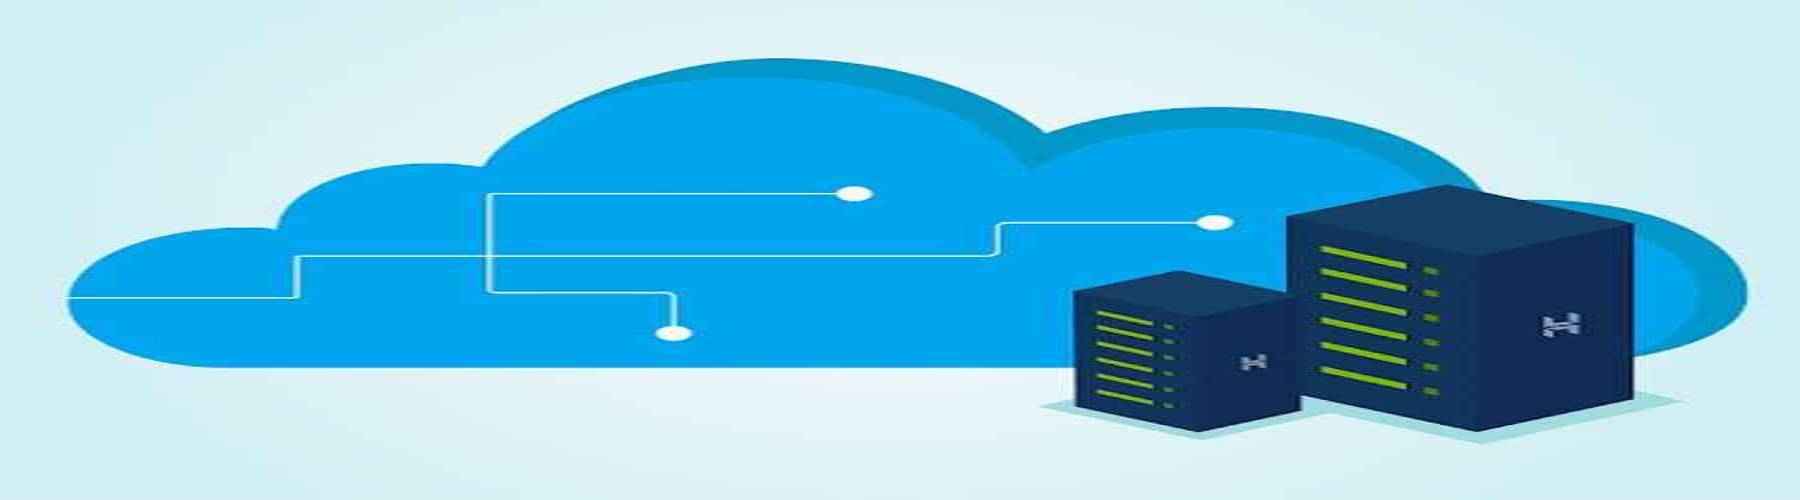 Benefits of Cloud Hosting Services